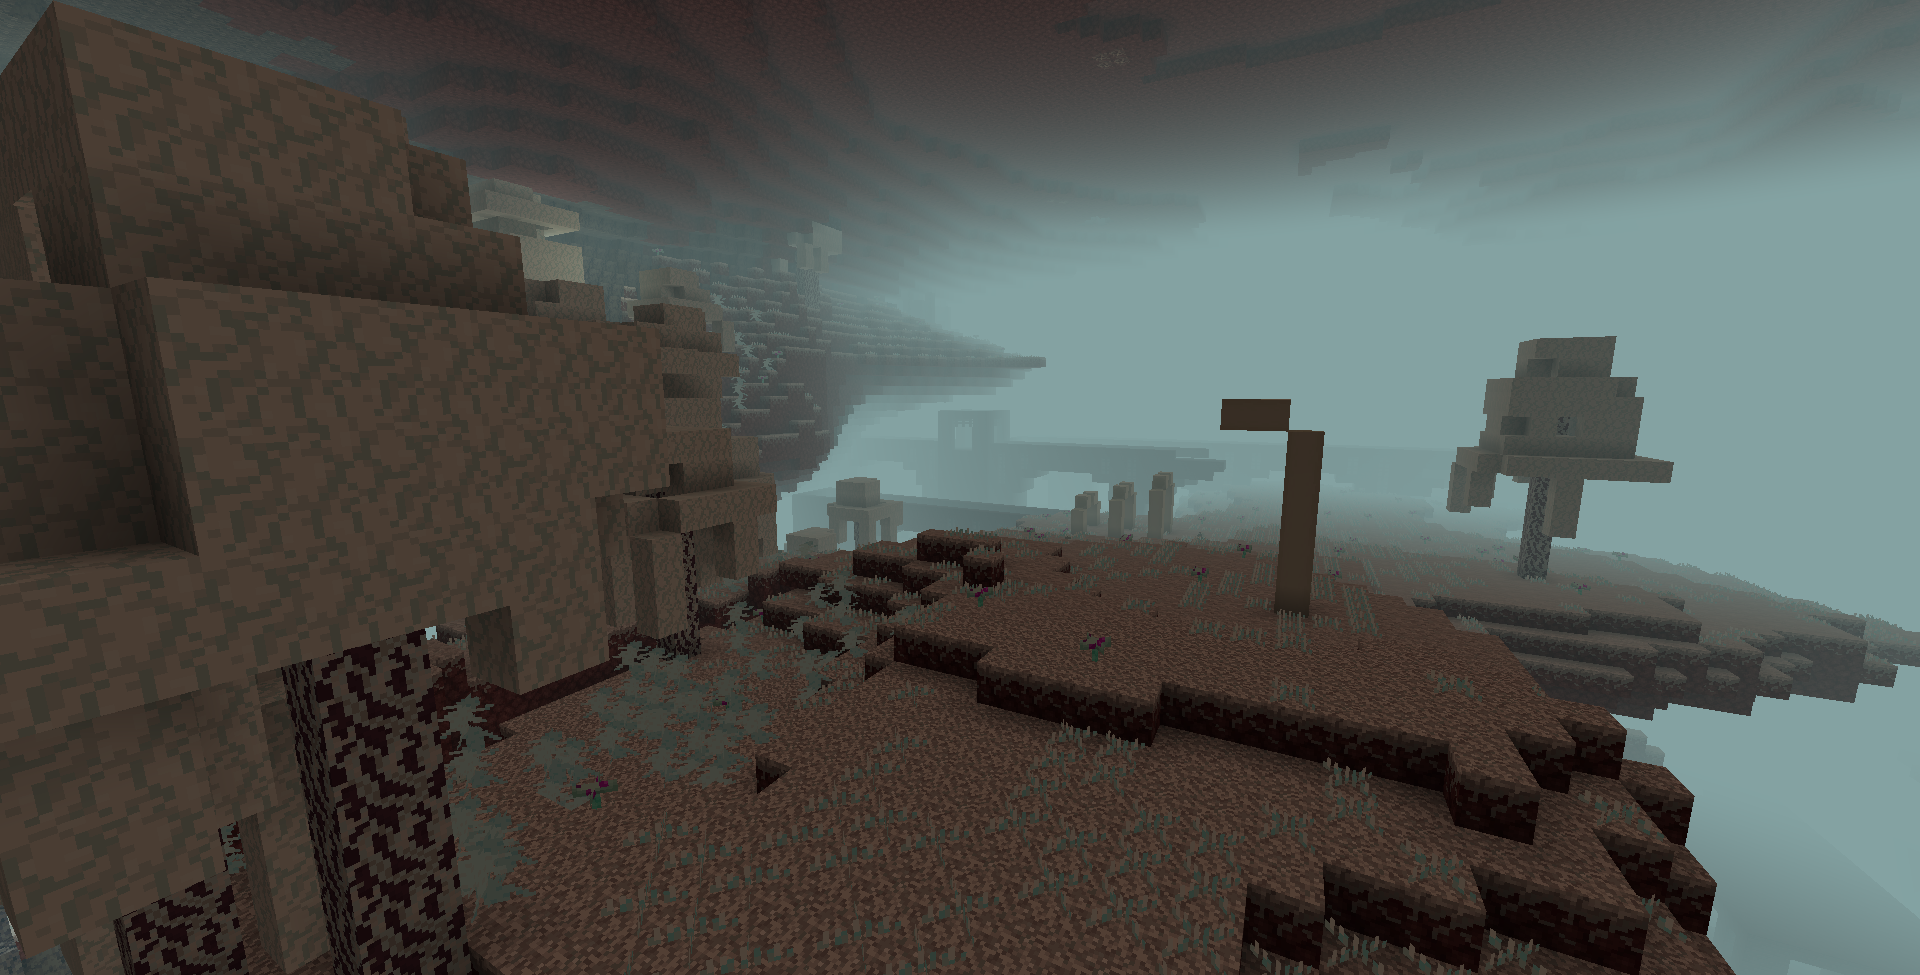 An image showing the frosted nether biomes. On the left, a small frosted forest can be seen, while the rest of the image is of large frosted wastes. Some fossils and a lone giant frosted fungus can be seen in the frosted wastes, and a Nether fortress is visible in the background.